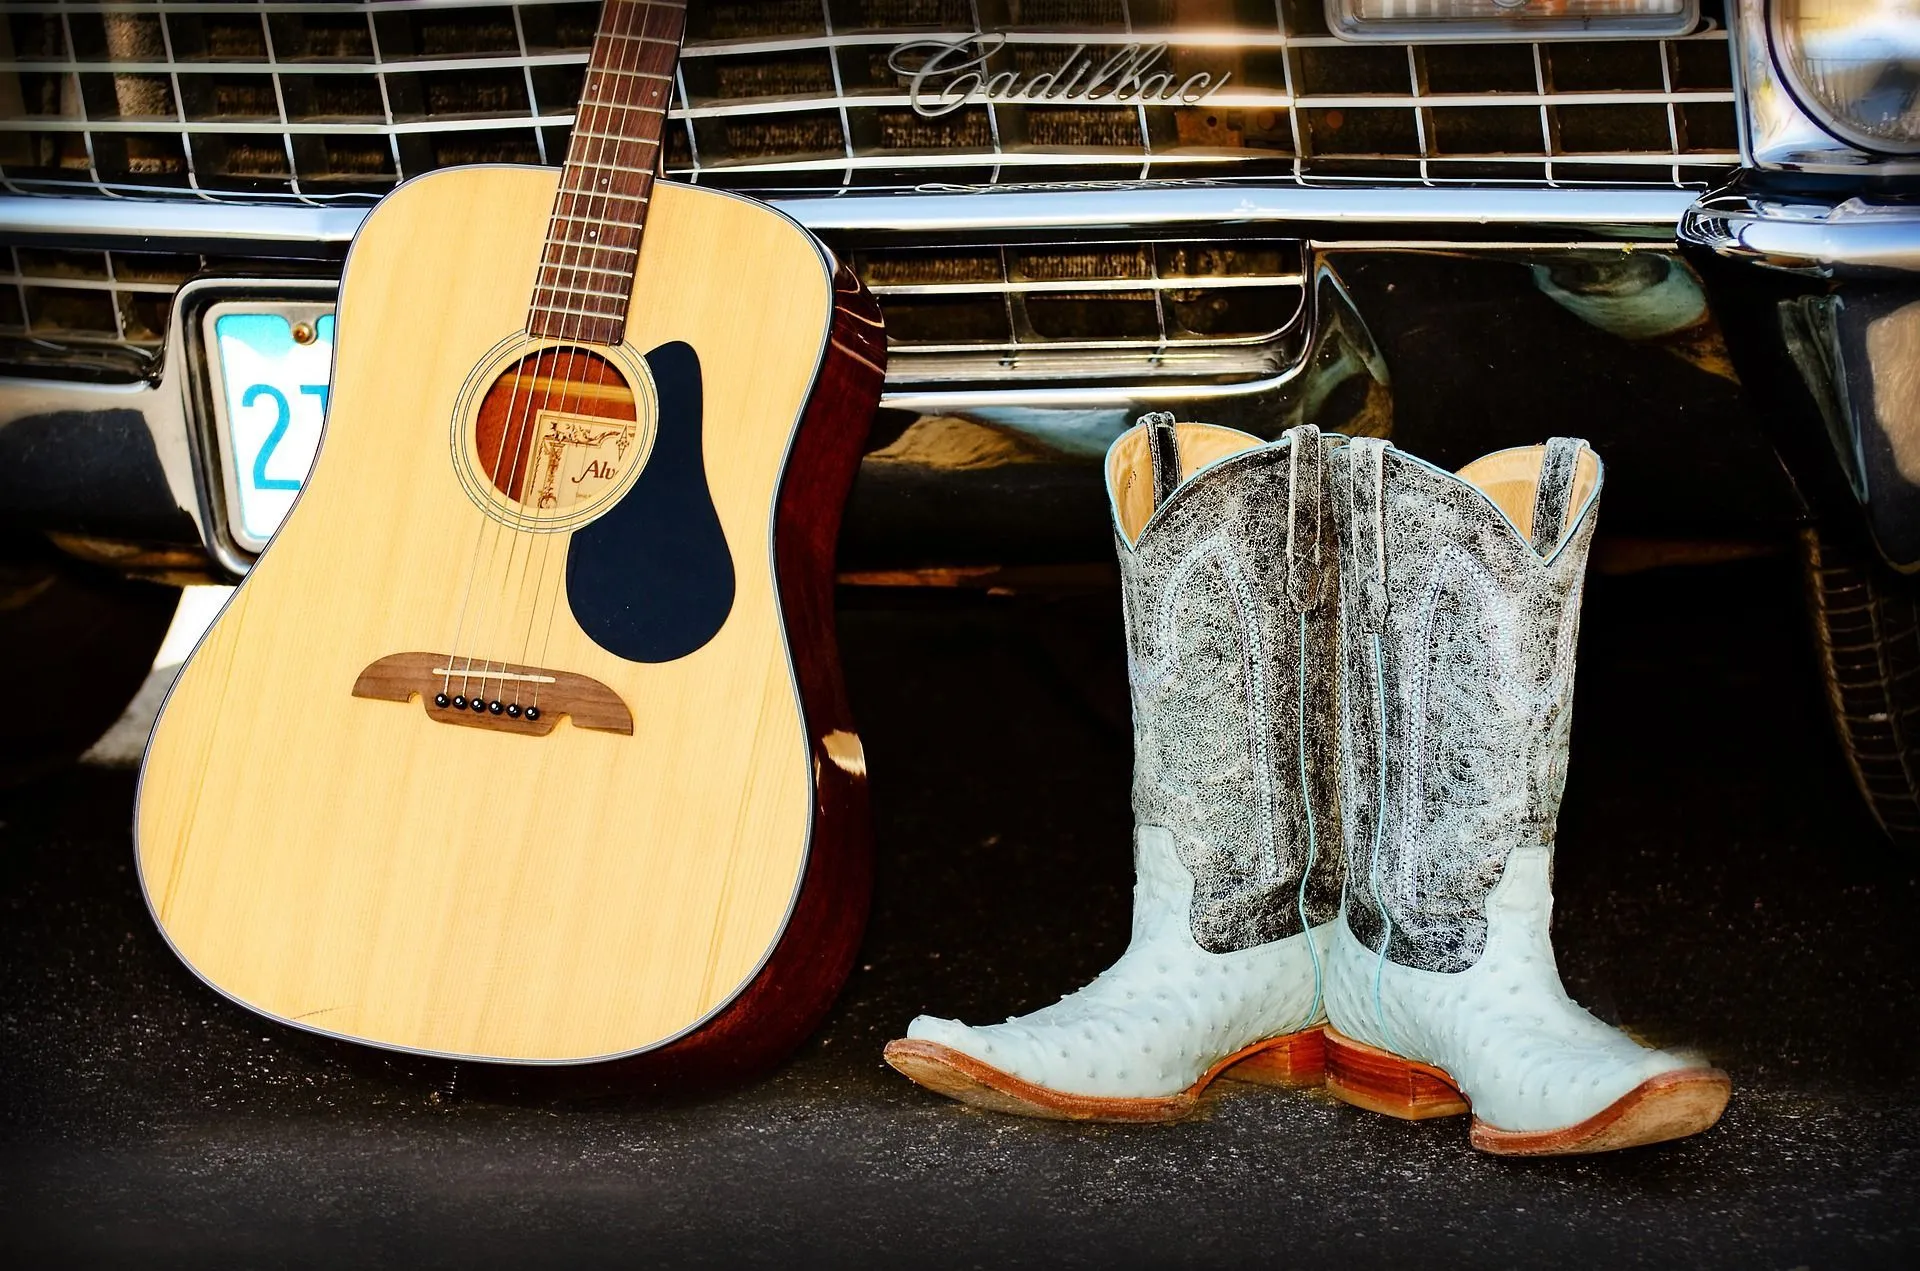 Read interesting country music fun facts here!